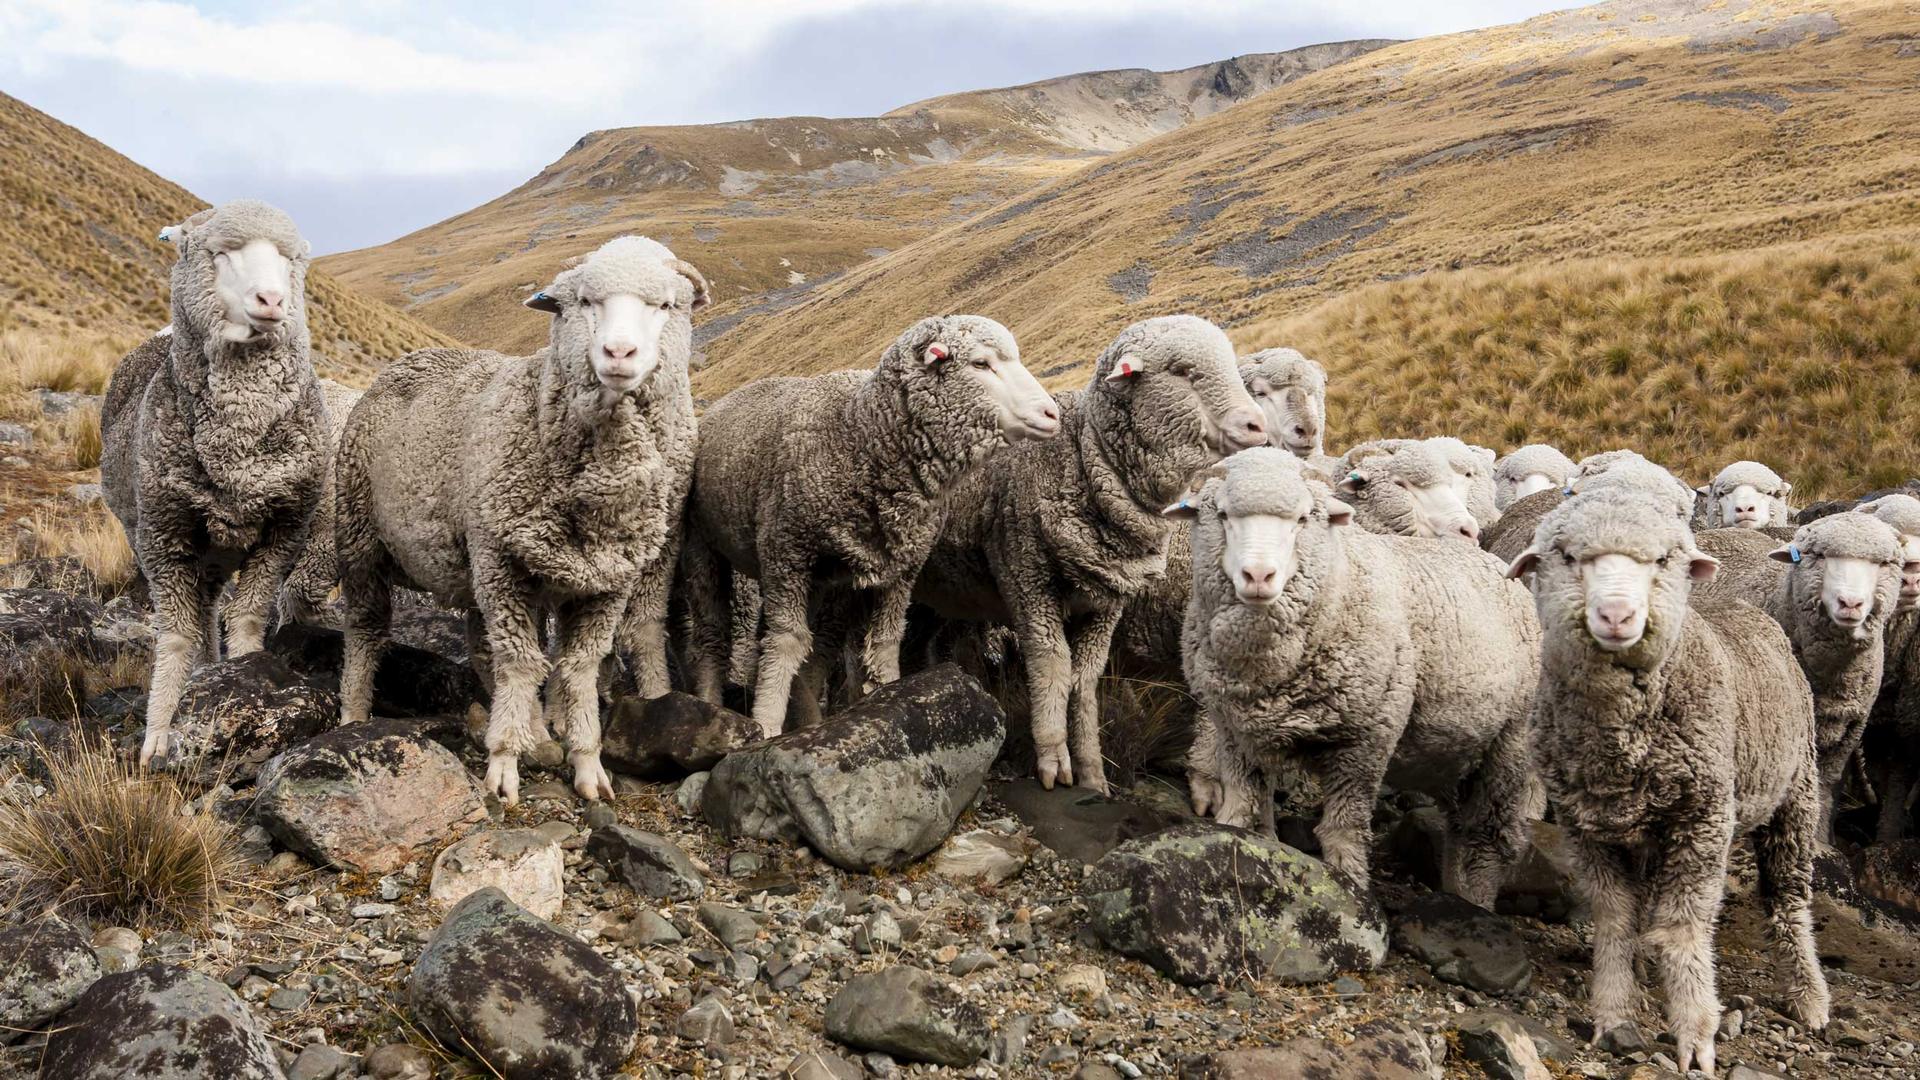 Sheep stand on rocks in front of mountains looking at the camera